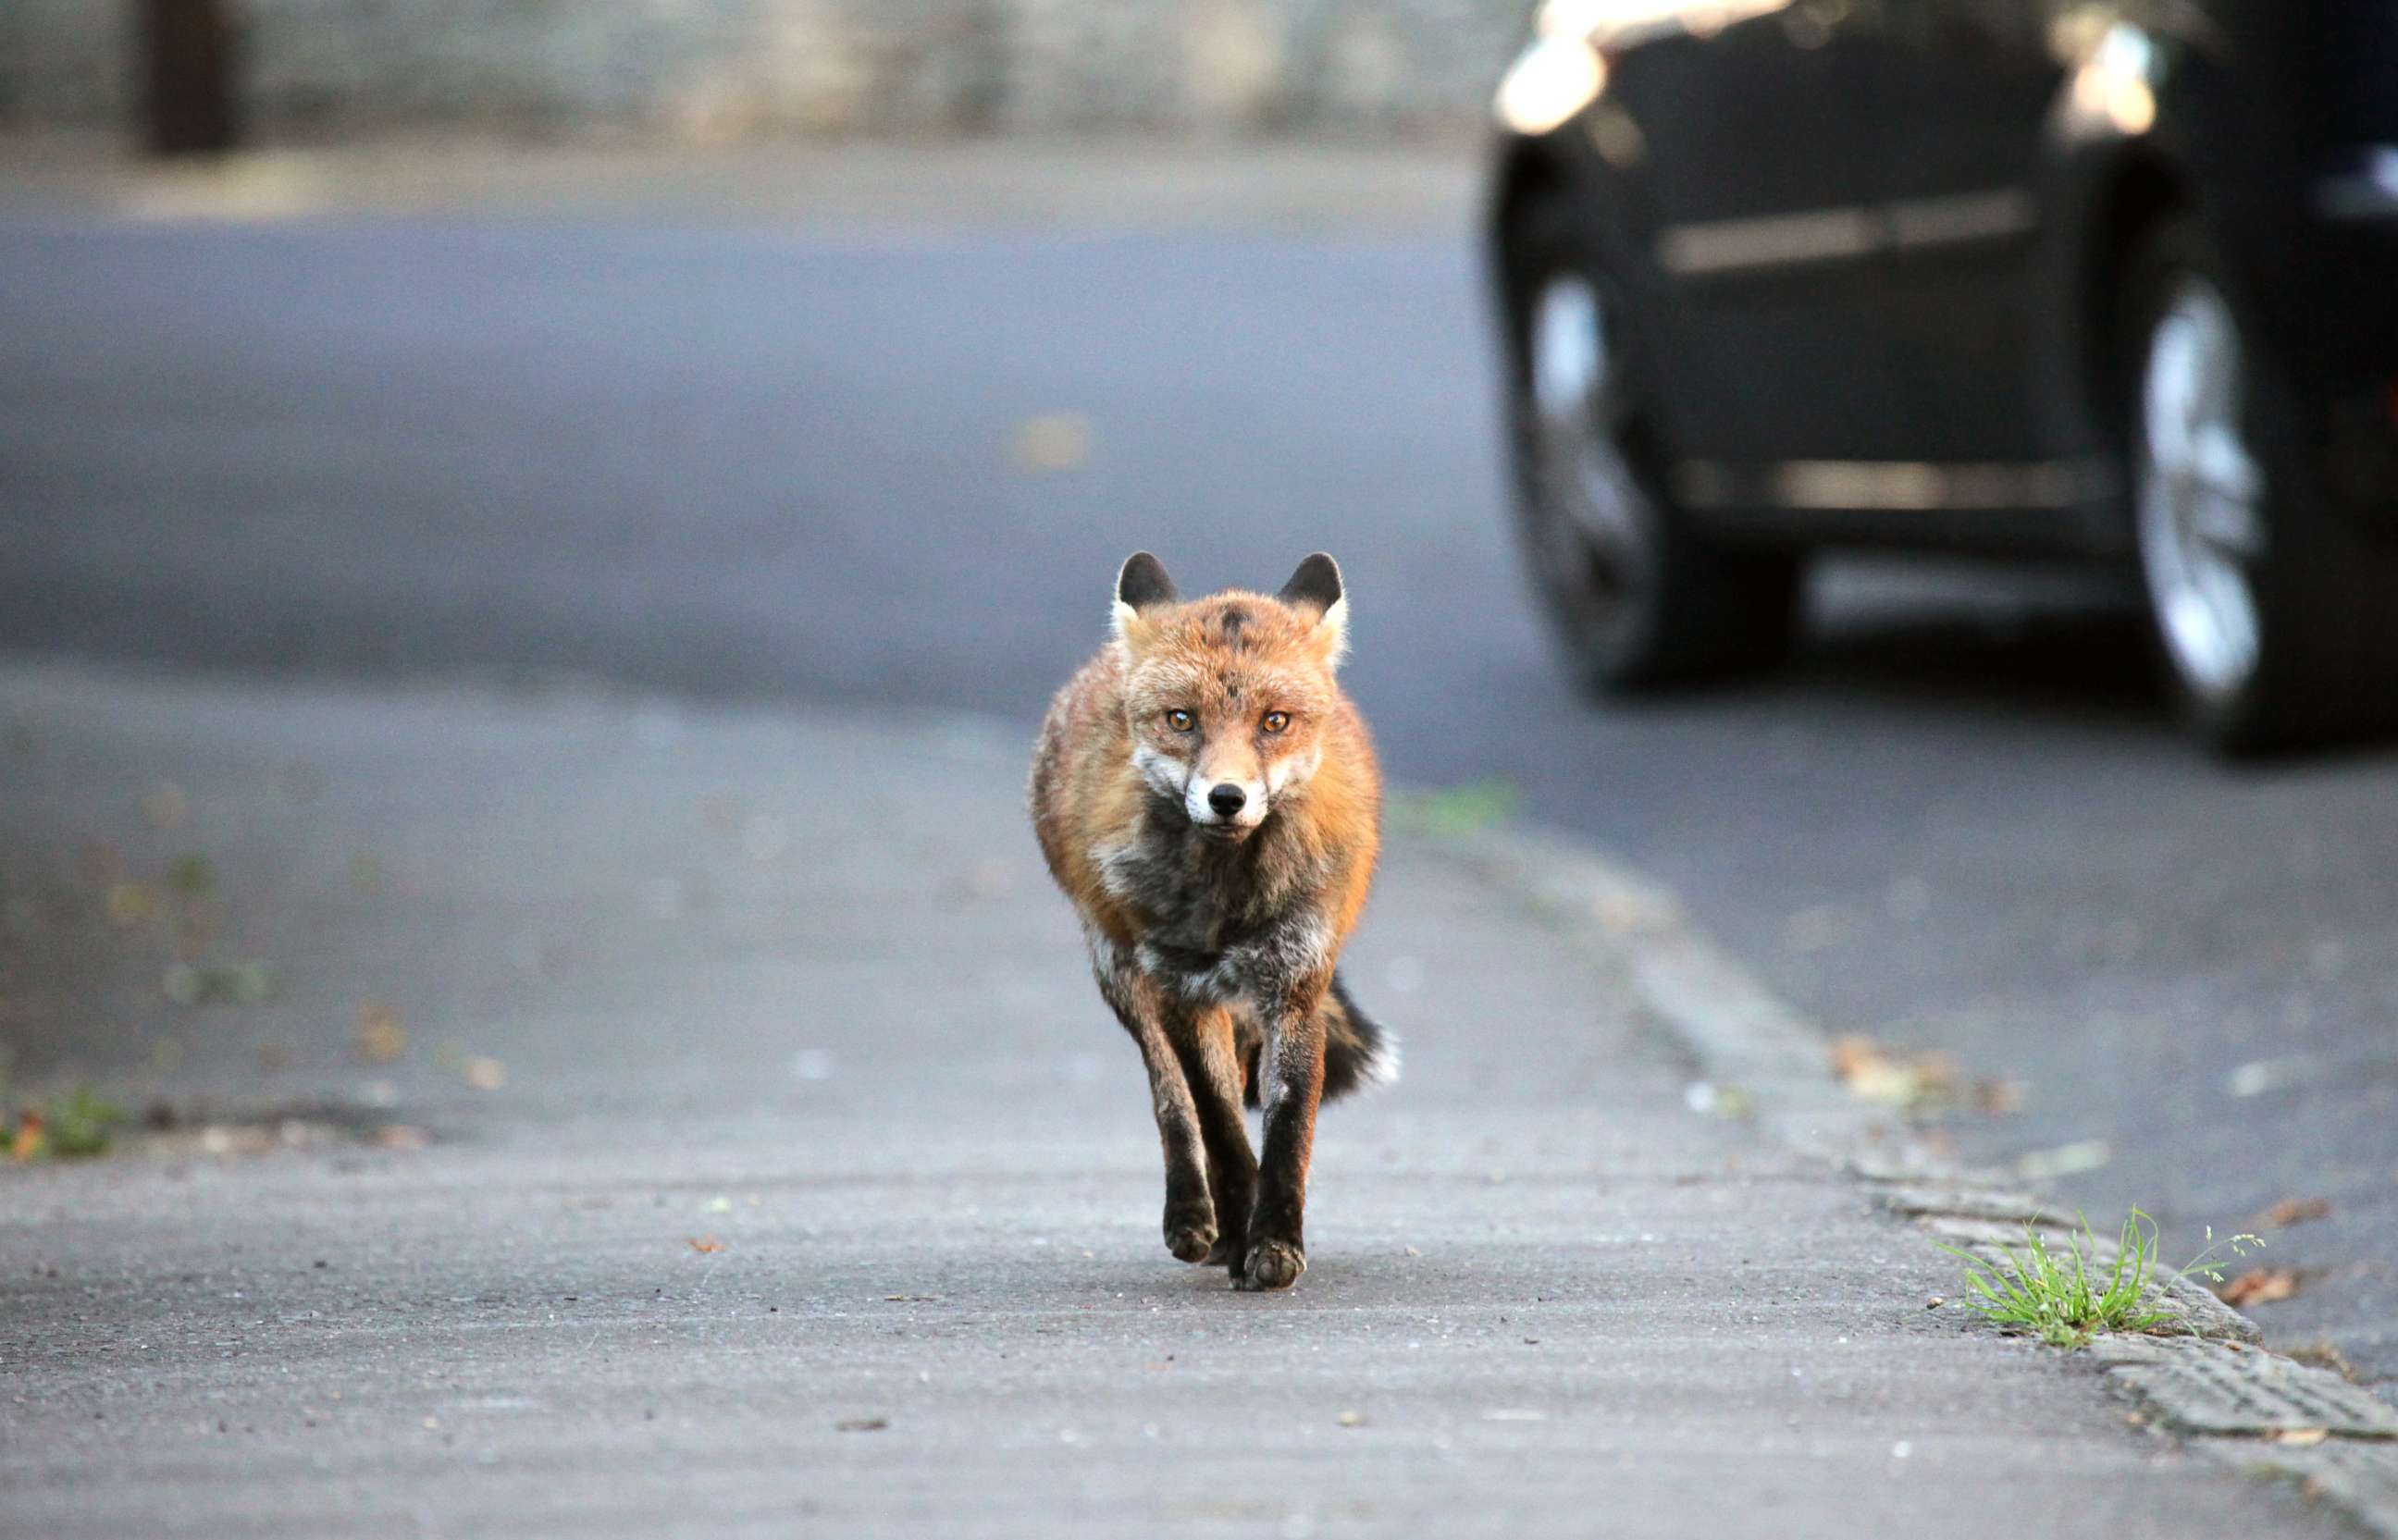 PHOTO: In this undated stock photo shows an urban fox running down a street.